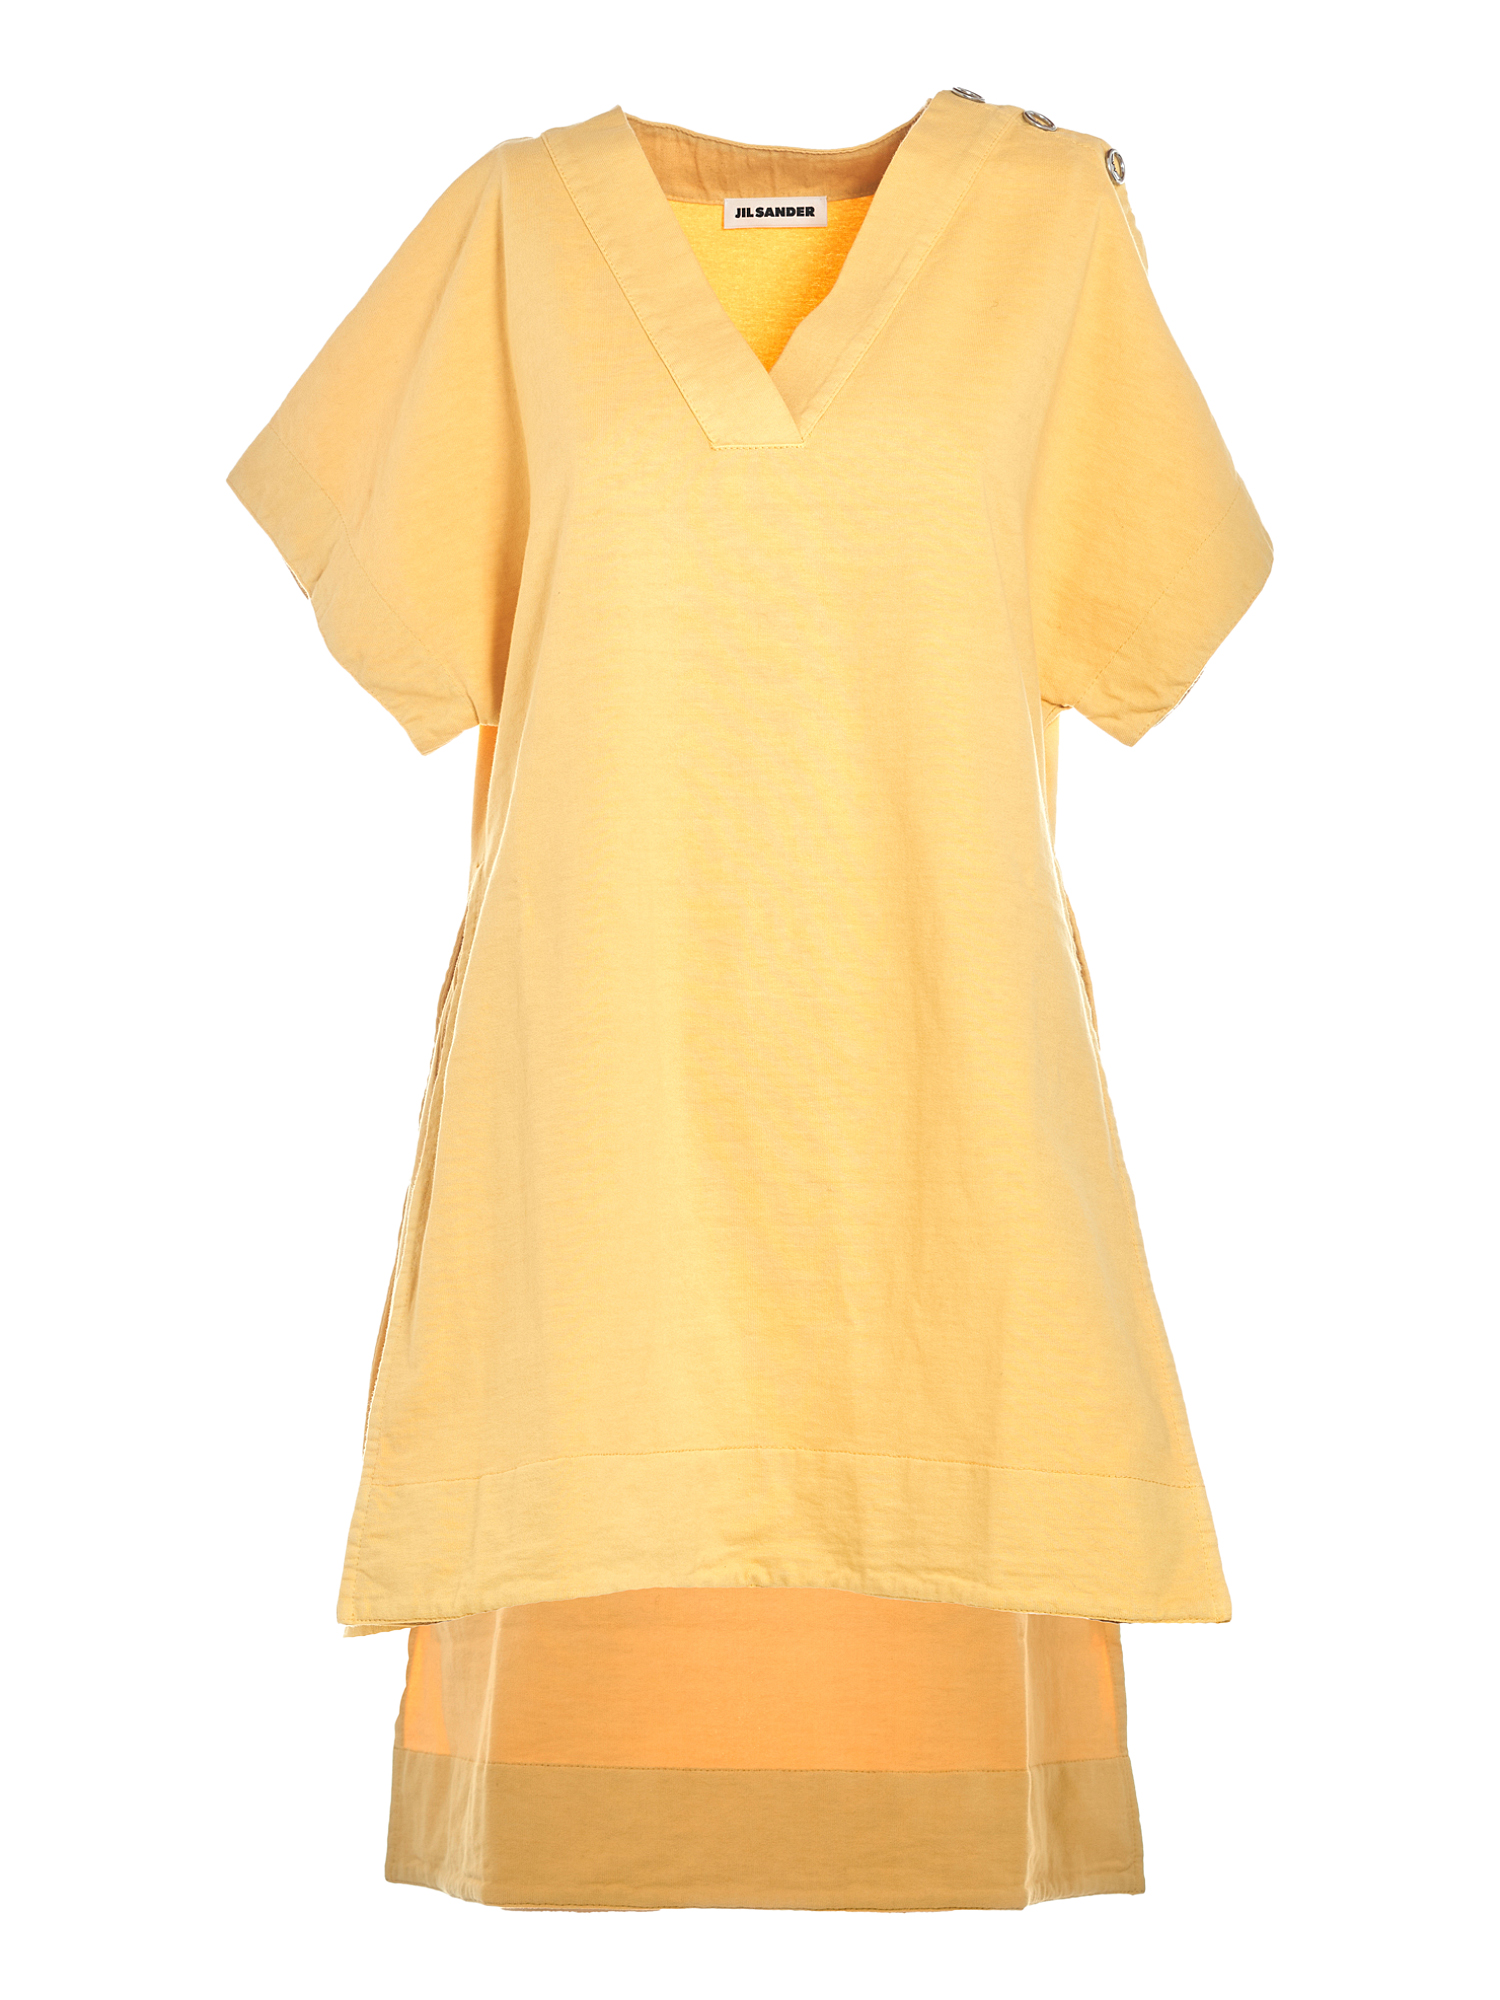 Condition: New With Tag,  , Color: Yellow - S - S -